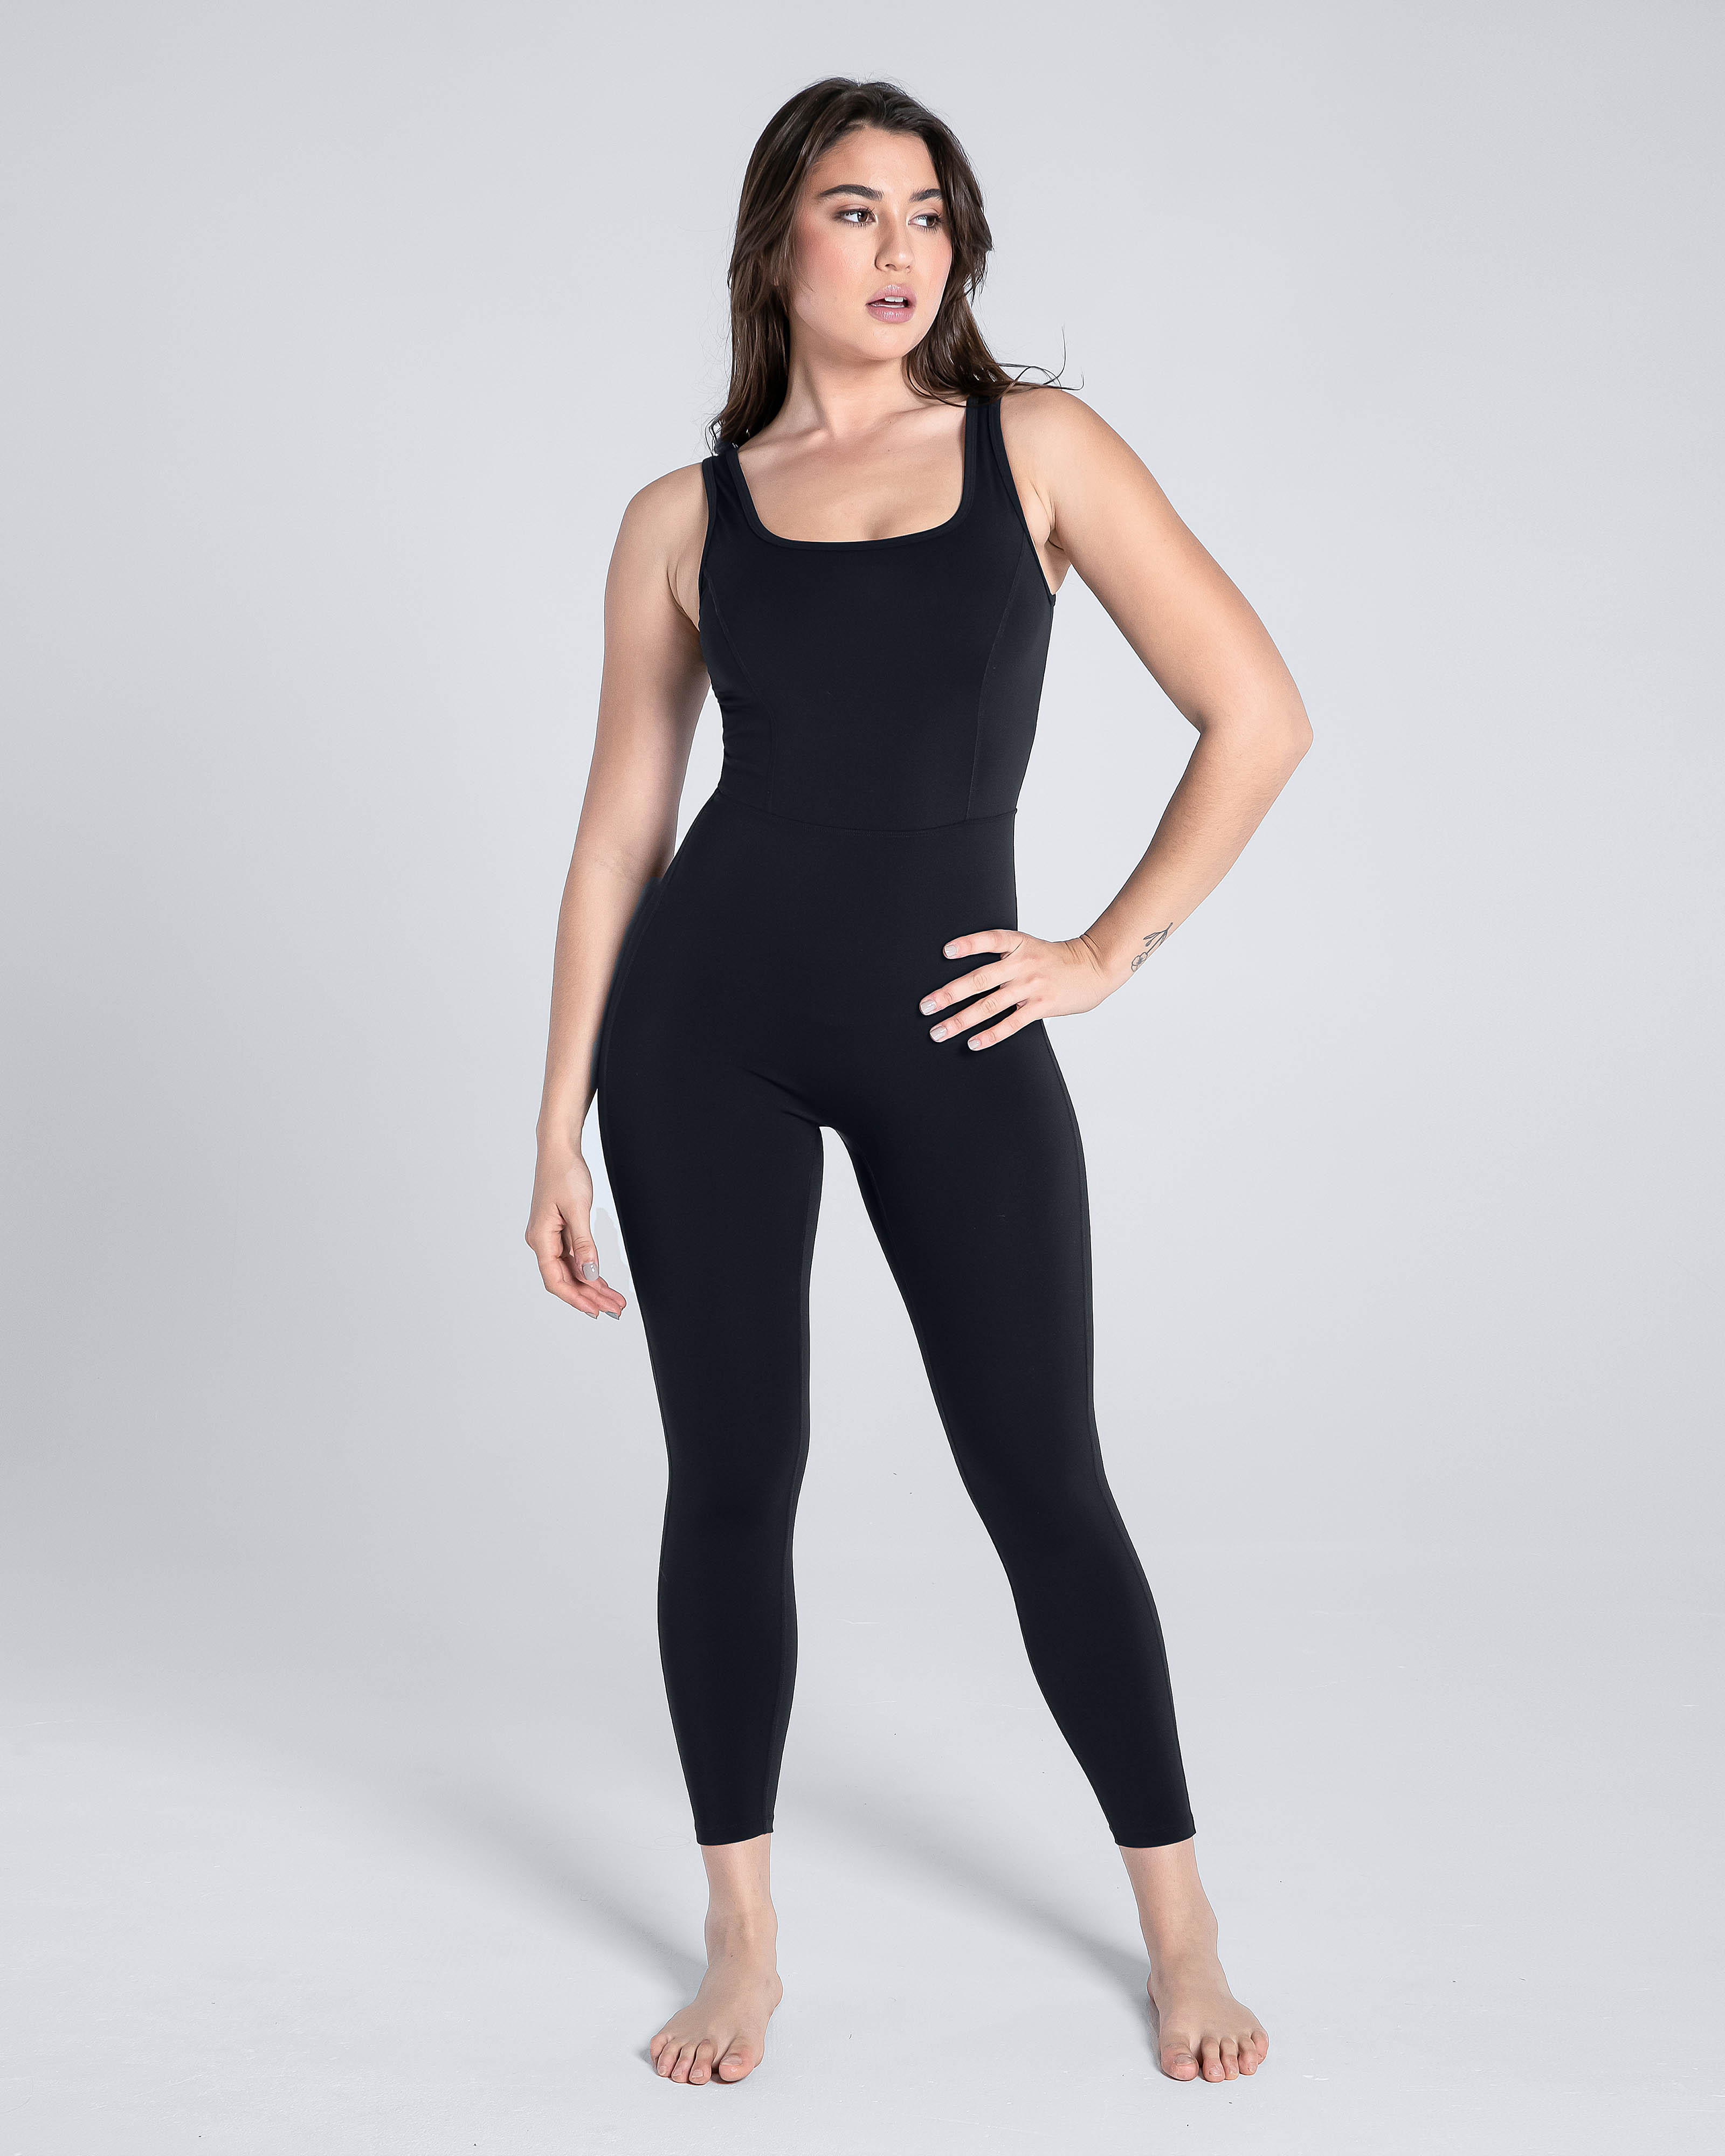 Women's Activewear Set Workout Sets Patchwork See Through Stripes Clothing  Suit Black Faux Fur Yoga Fitness Gym Workout Butt Lift 4 Way Stretch Breath